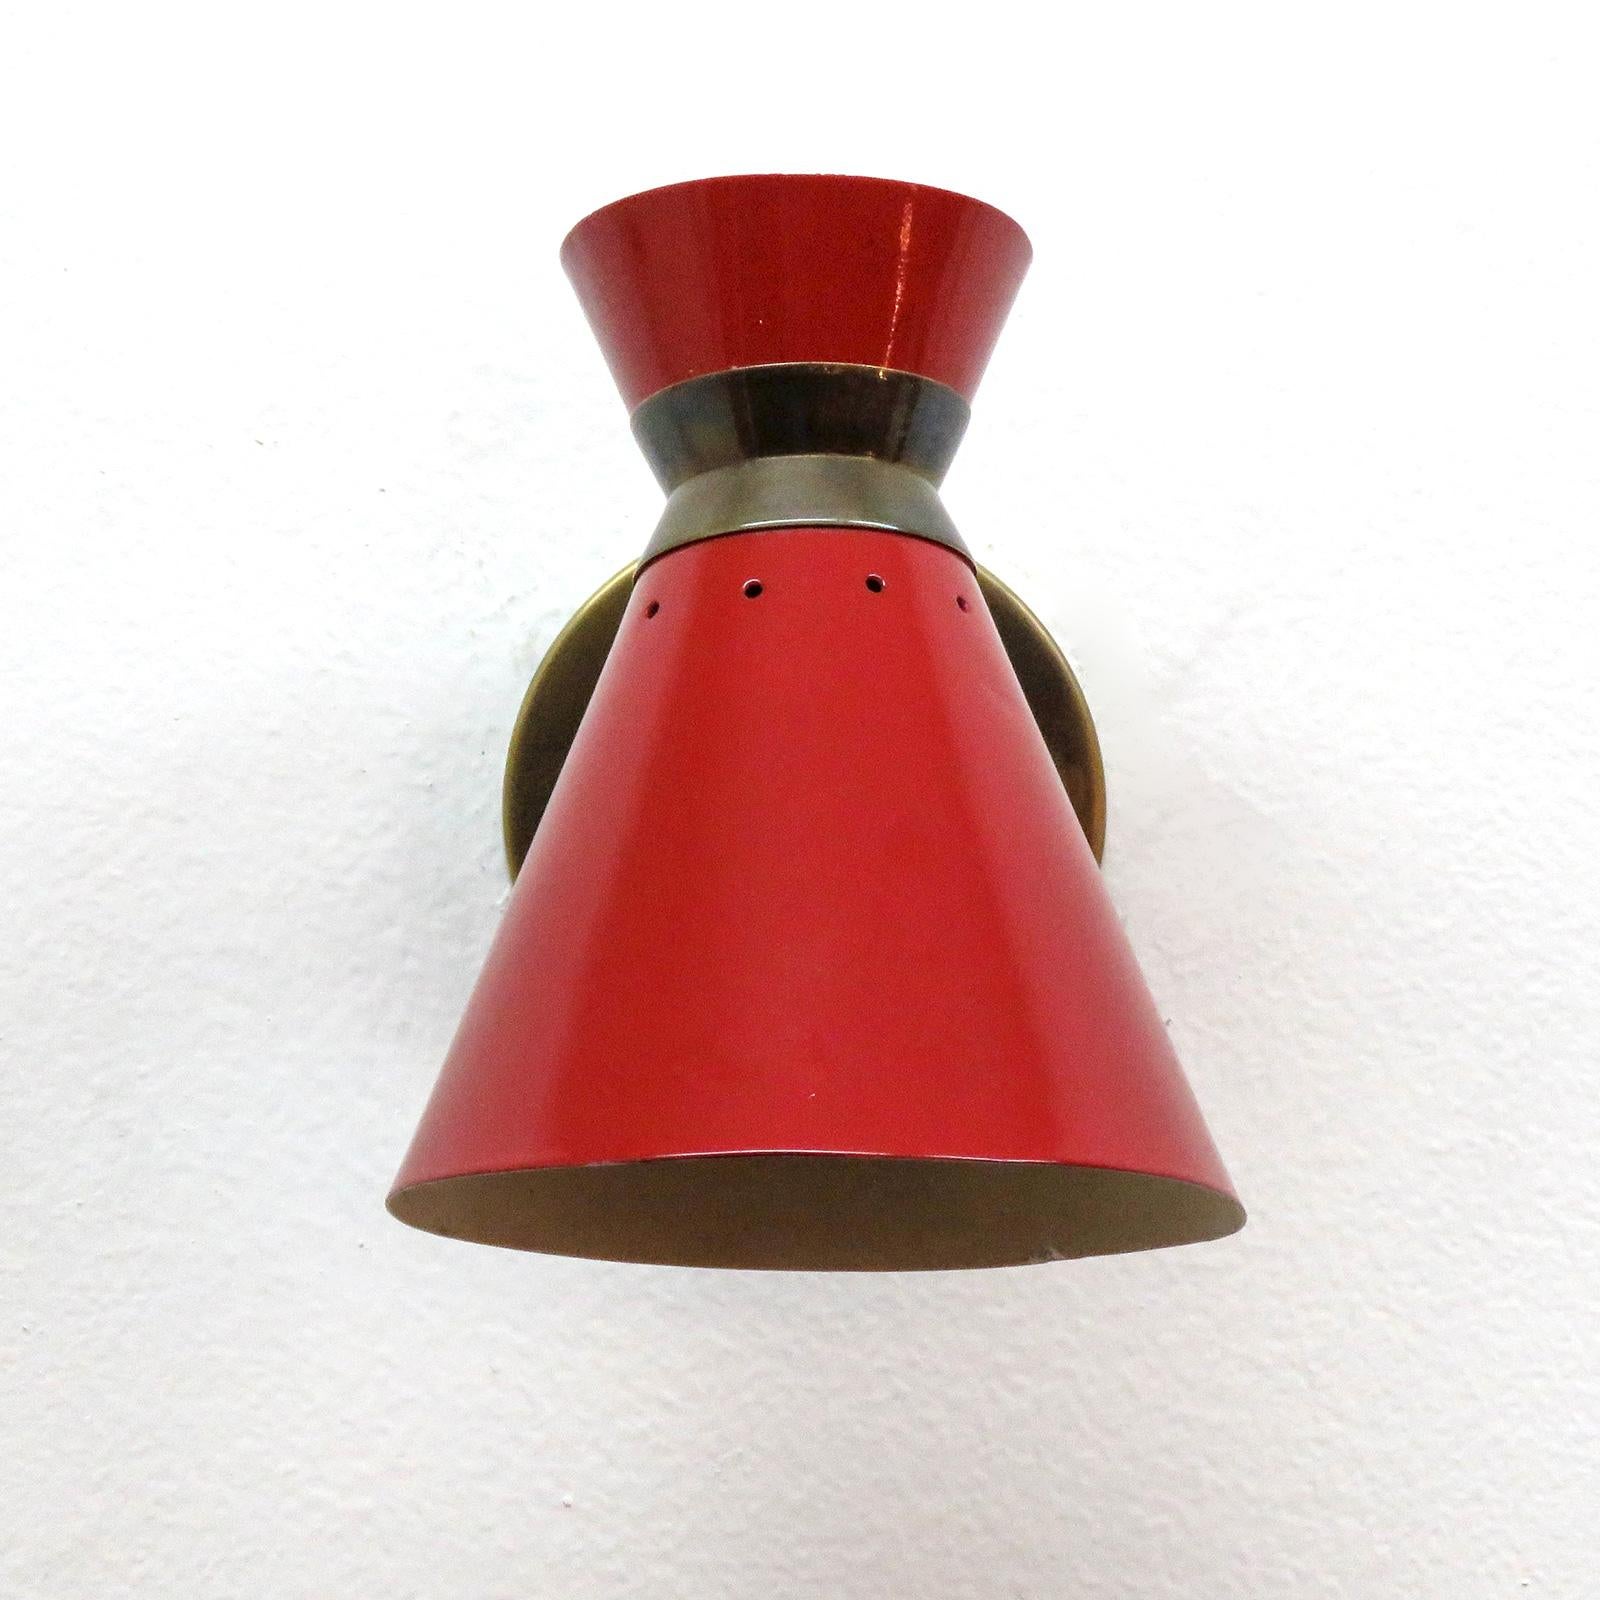 Elegant pair of French short stem double cone wall lights by Rene Mathieu in red enamel and brass, individual on and off switch, some wear to the interior enamel, wired for US standards, one E12 socket per fixture, max. wattage 60w each, bulbs